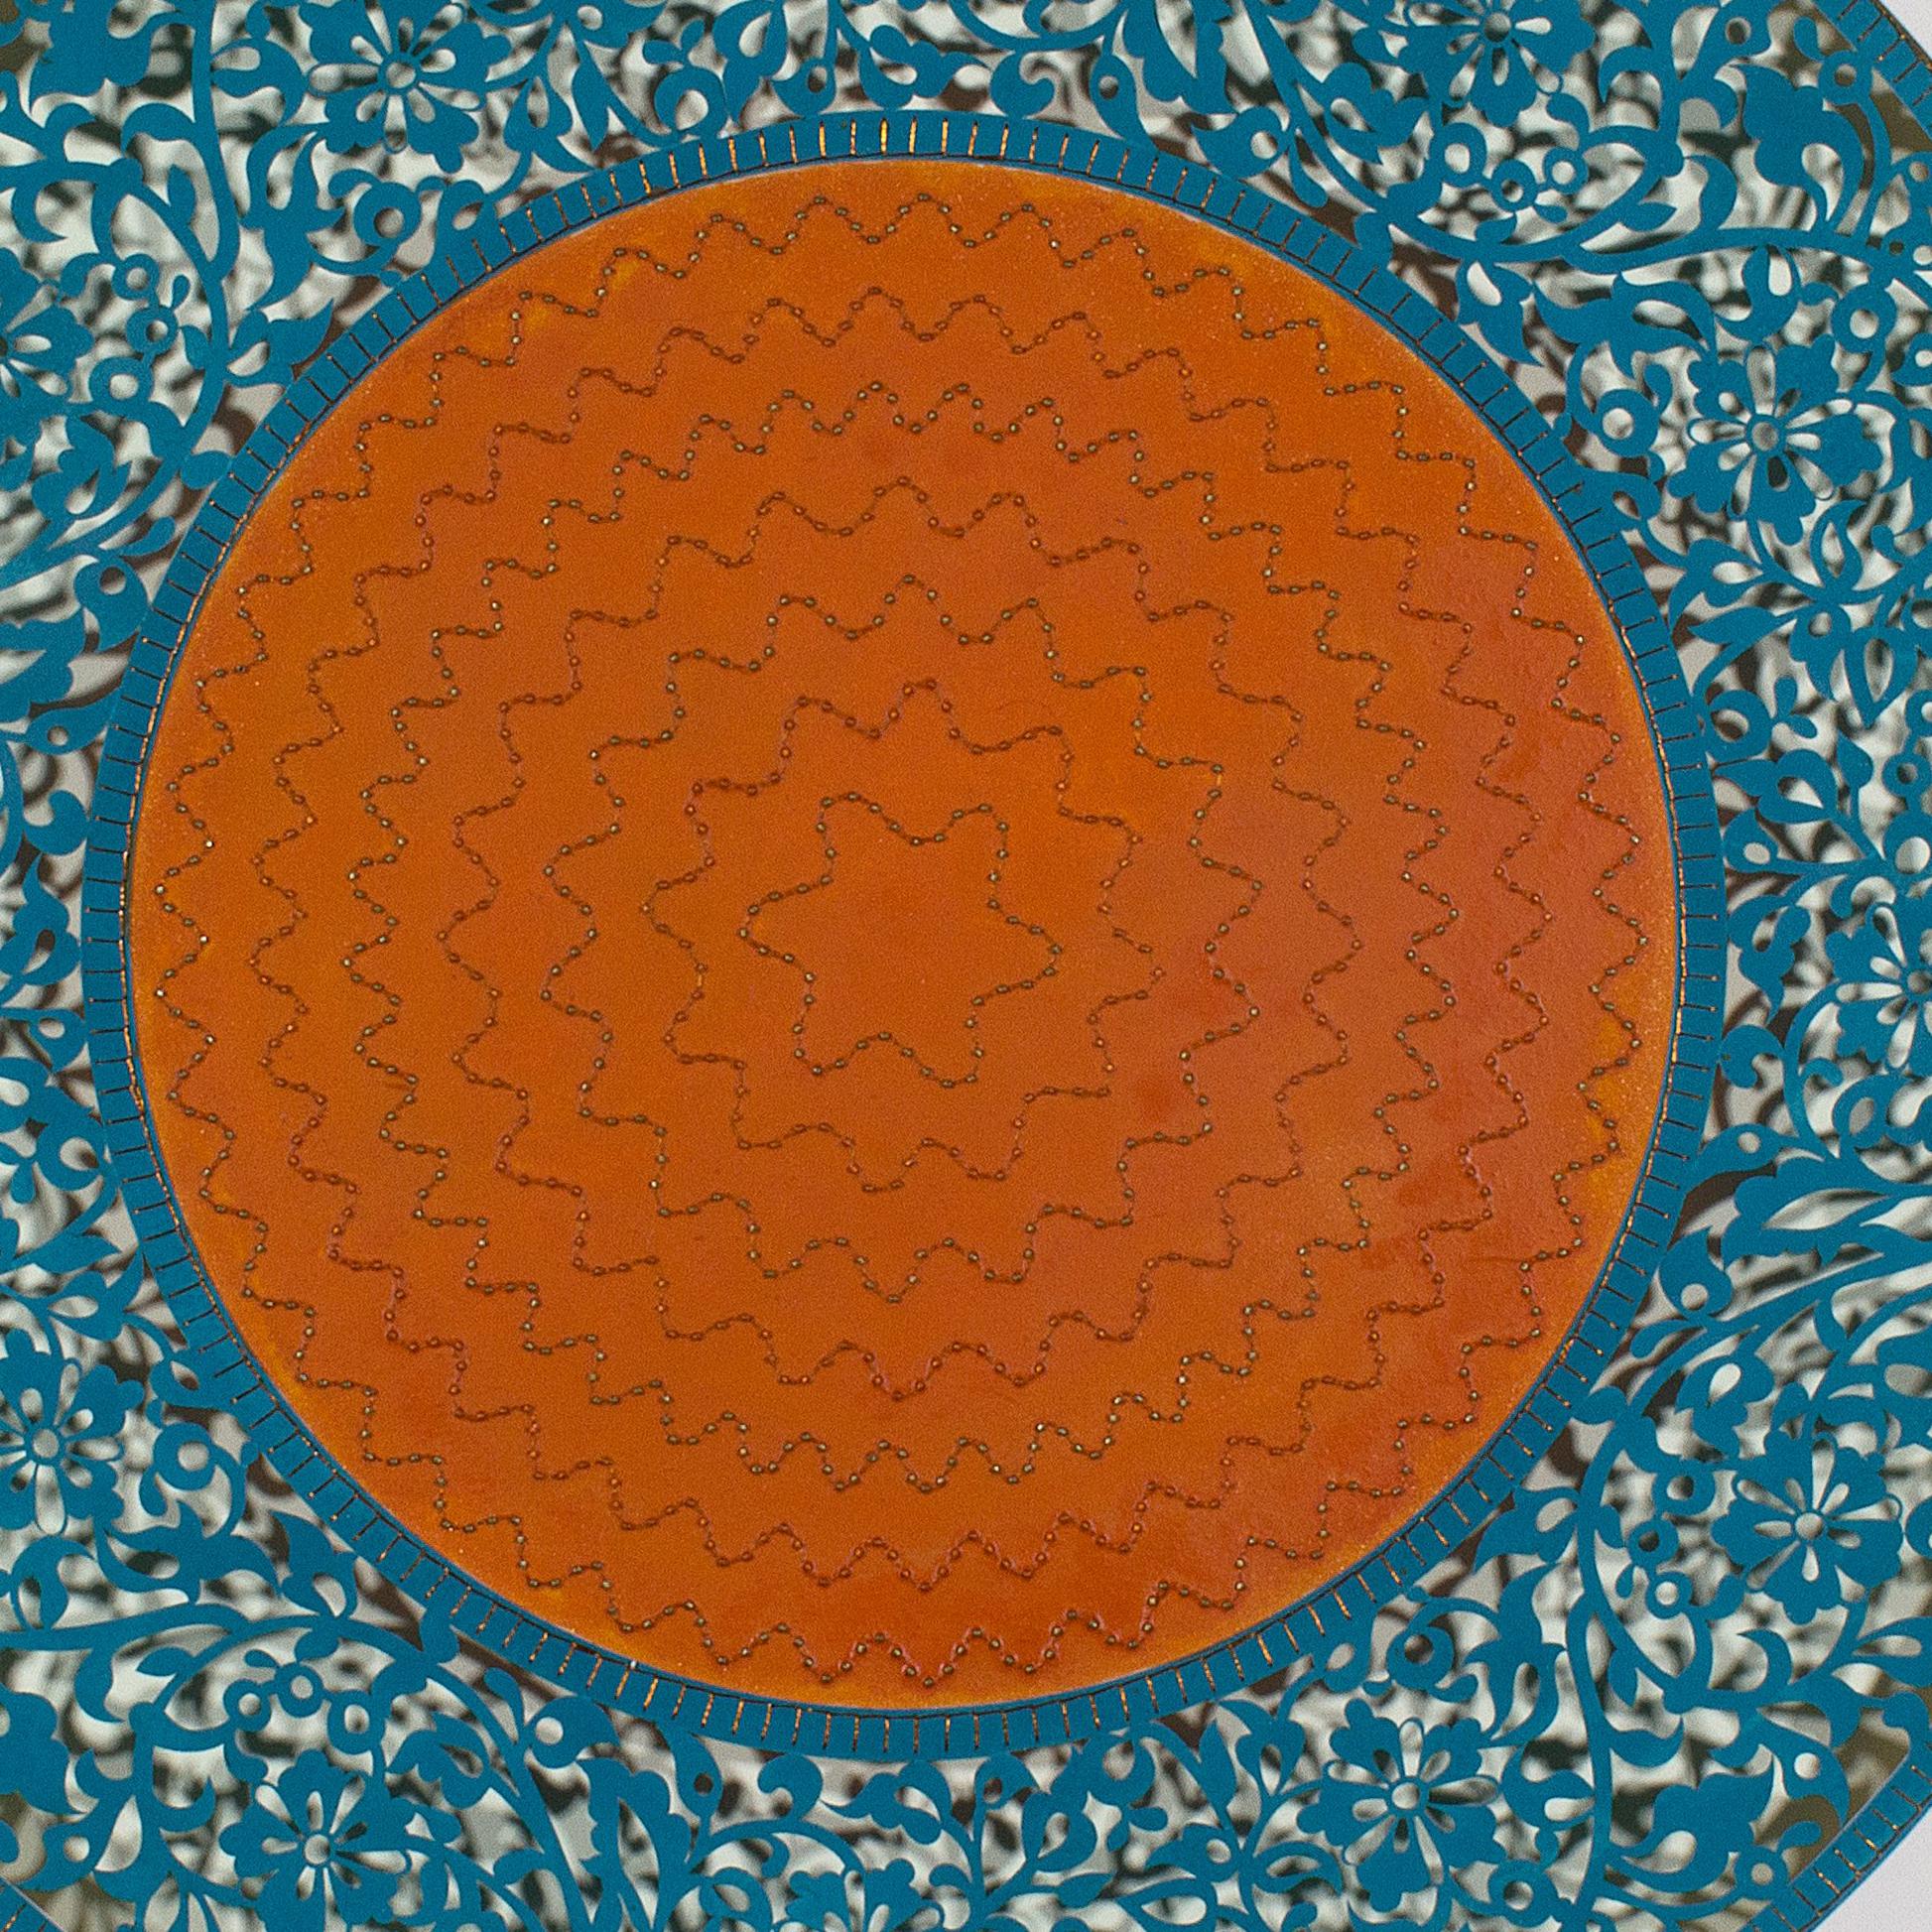 Flowers (Blue and Orange Circle) - Gray Abstract Painting by Anila Quayyum Agha